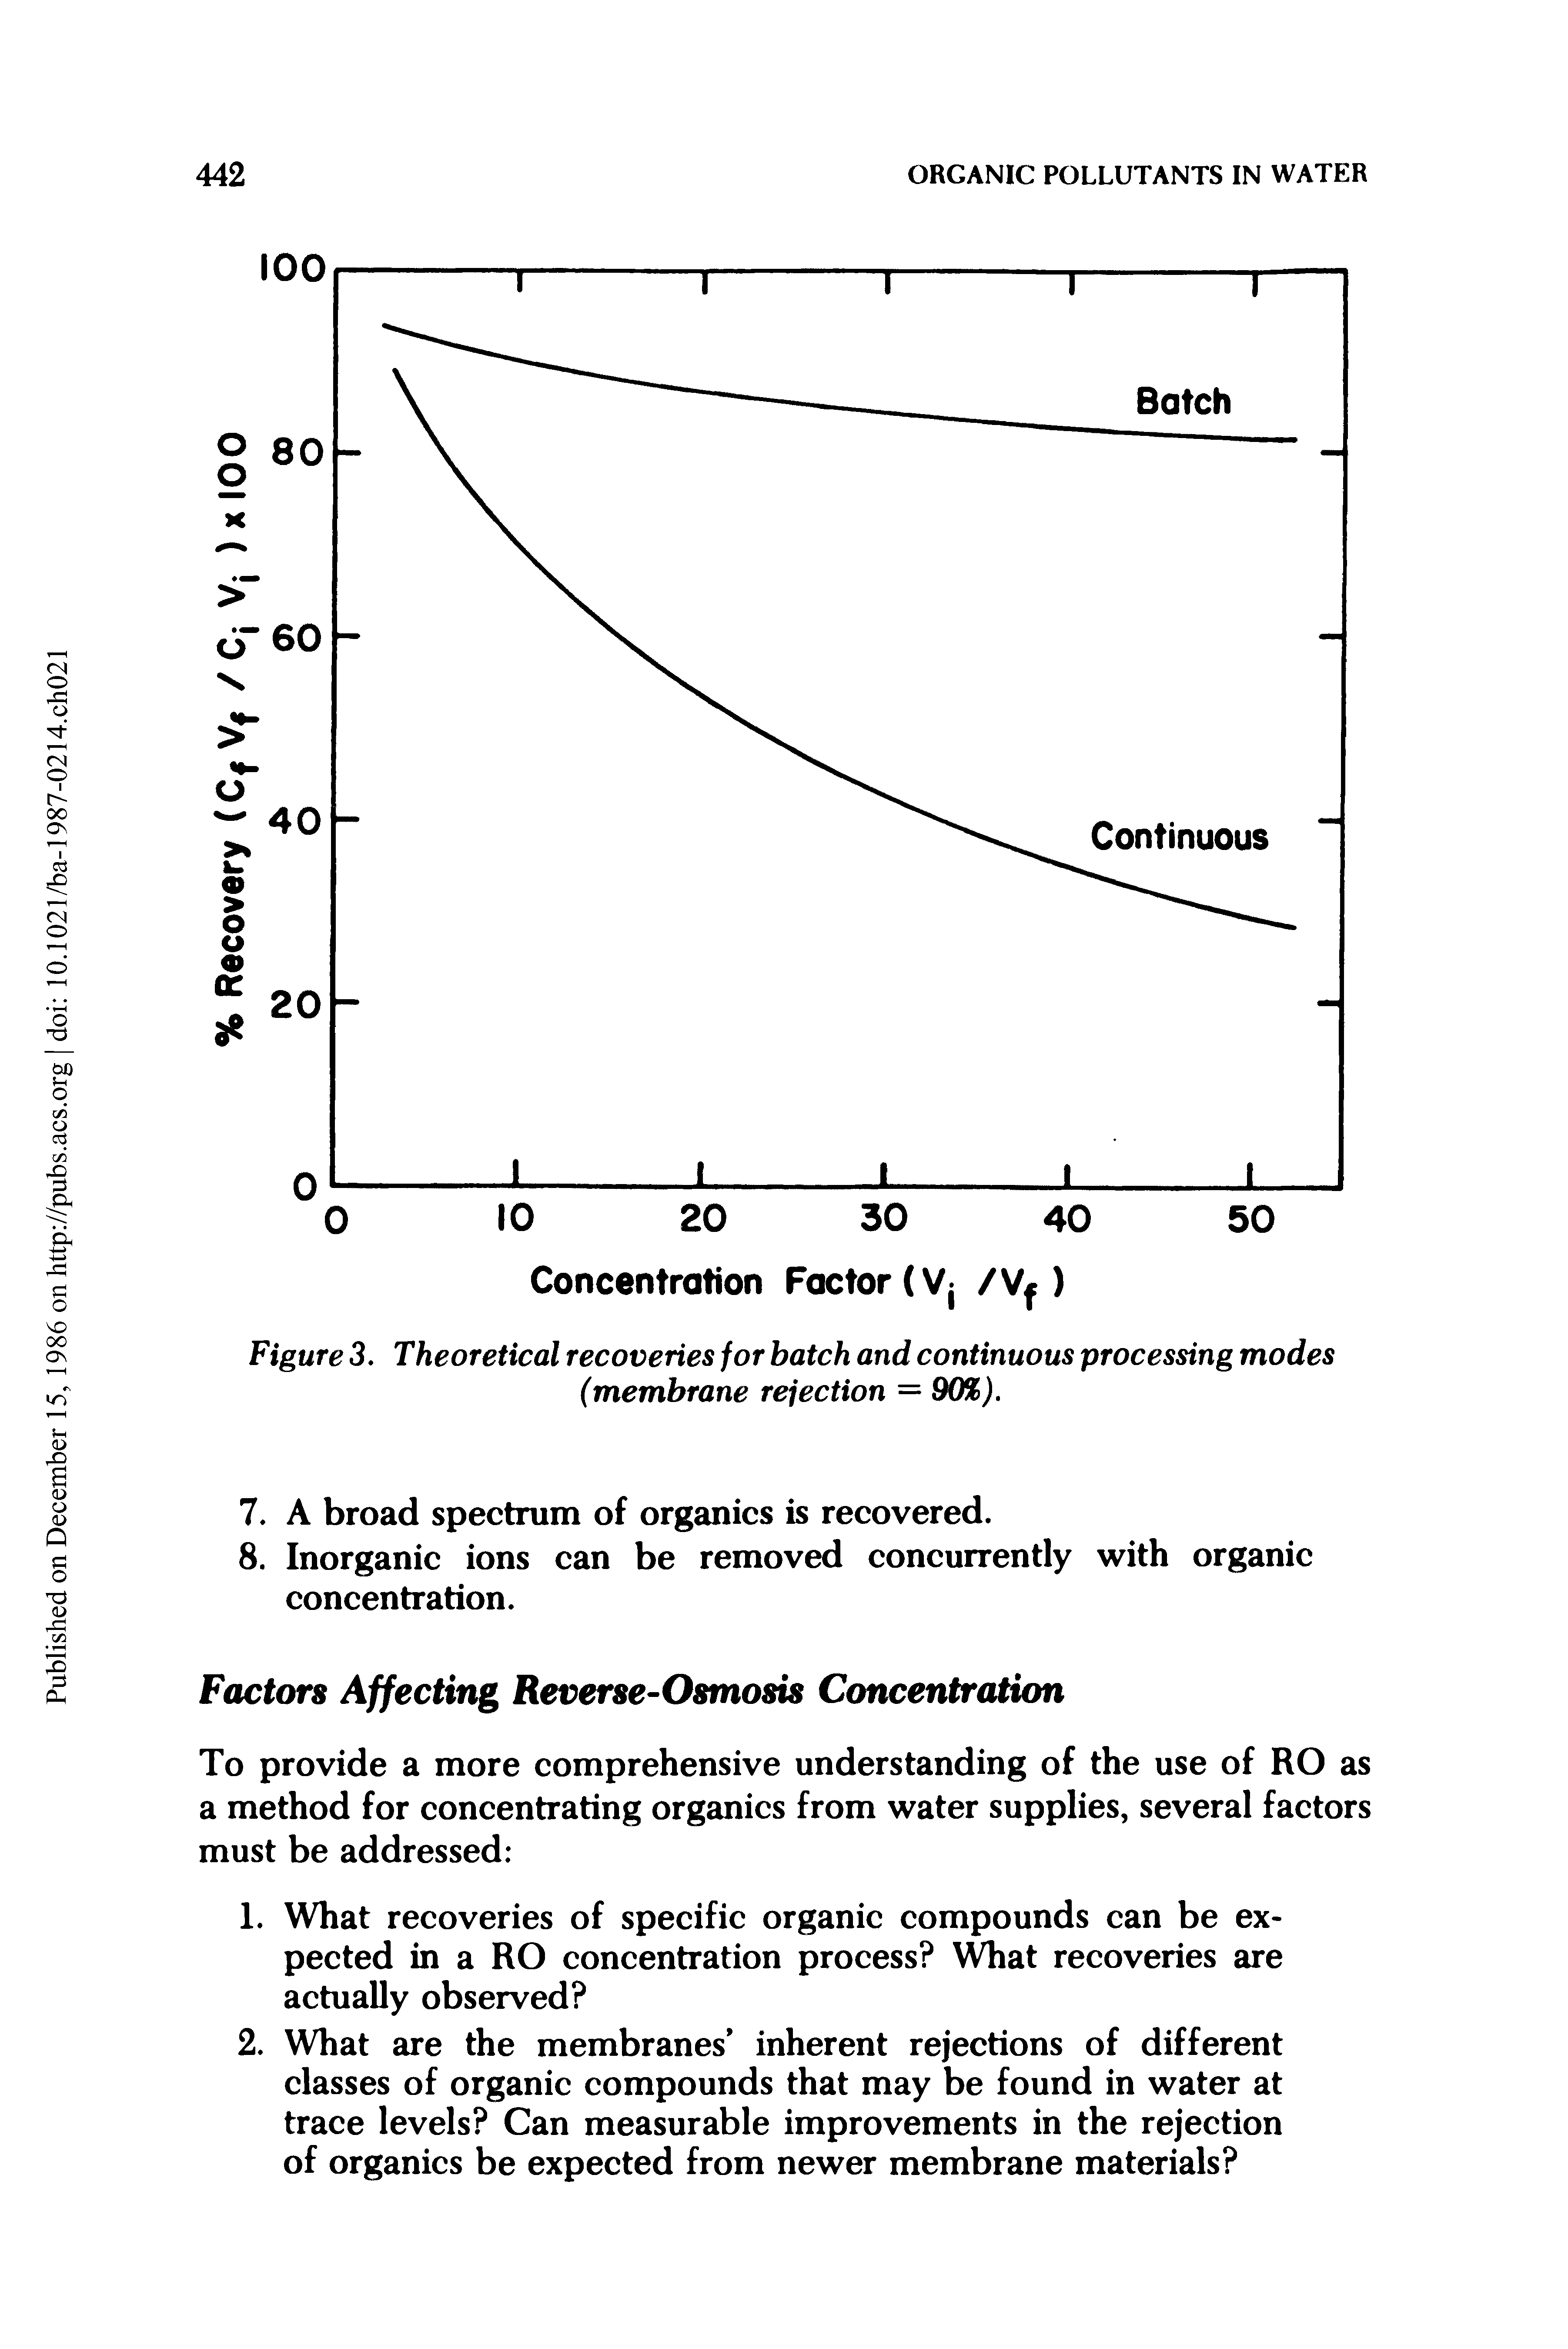 Figure 3. Theoretical recoveries for batch and continuous processing modes (membrane rejection — 90%).